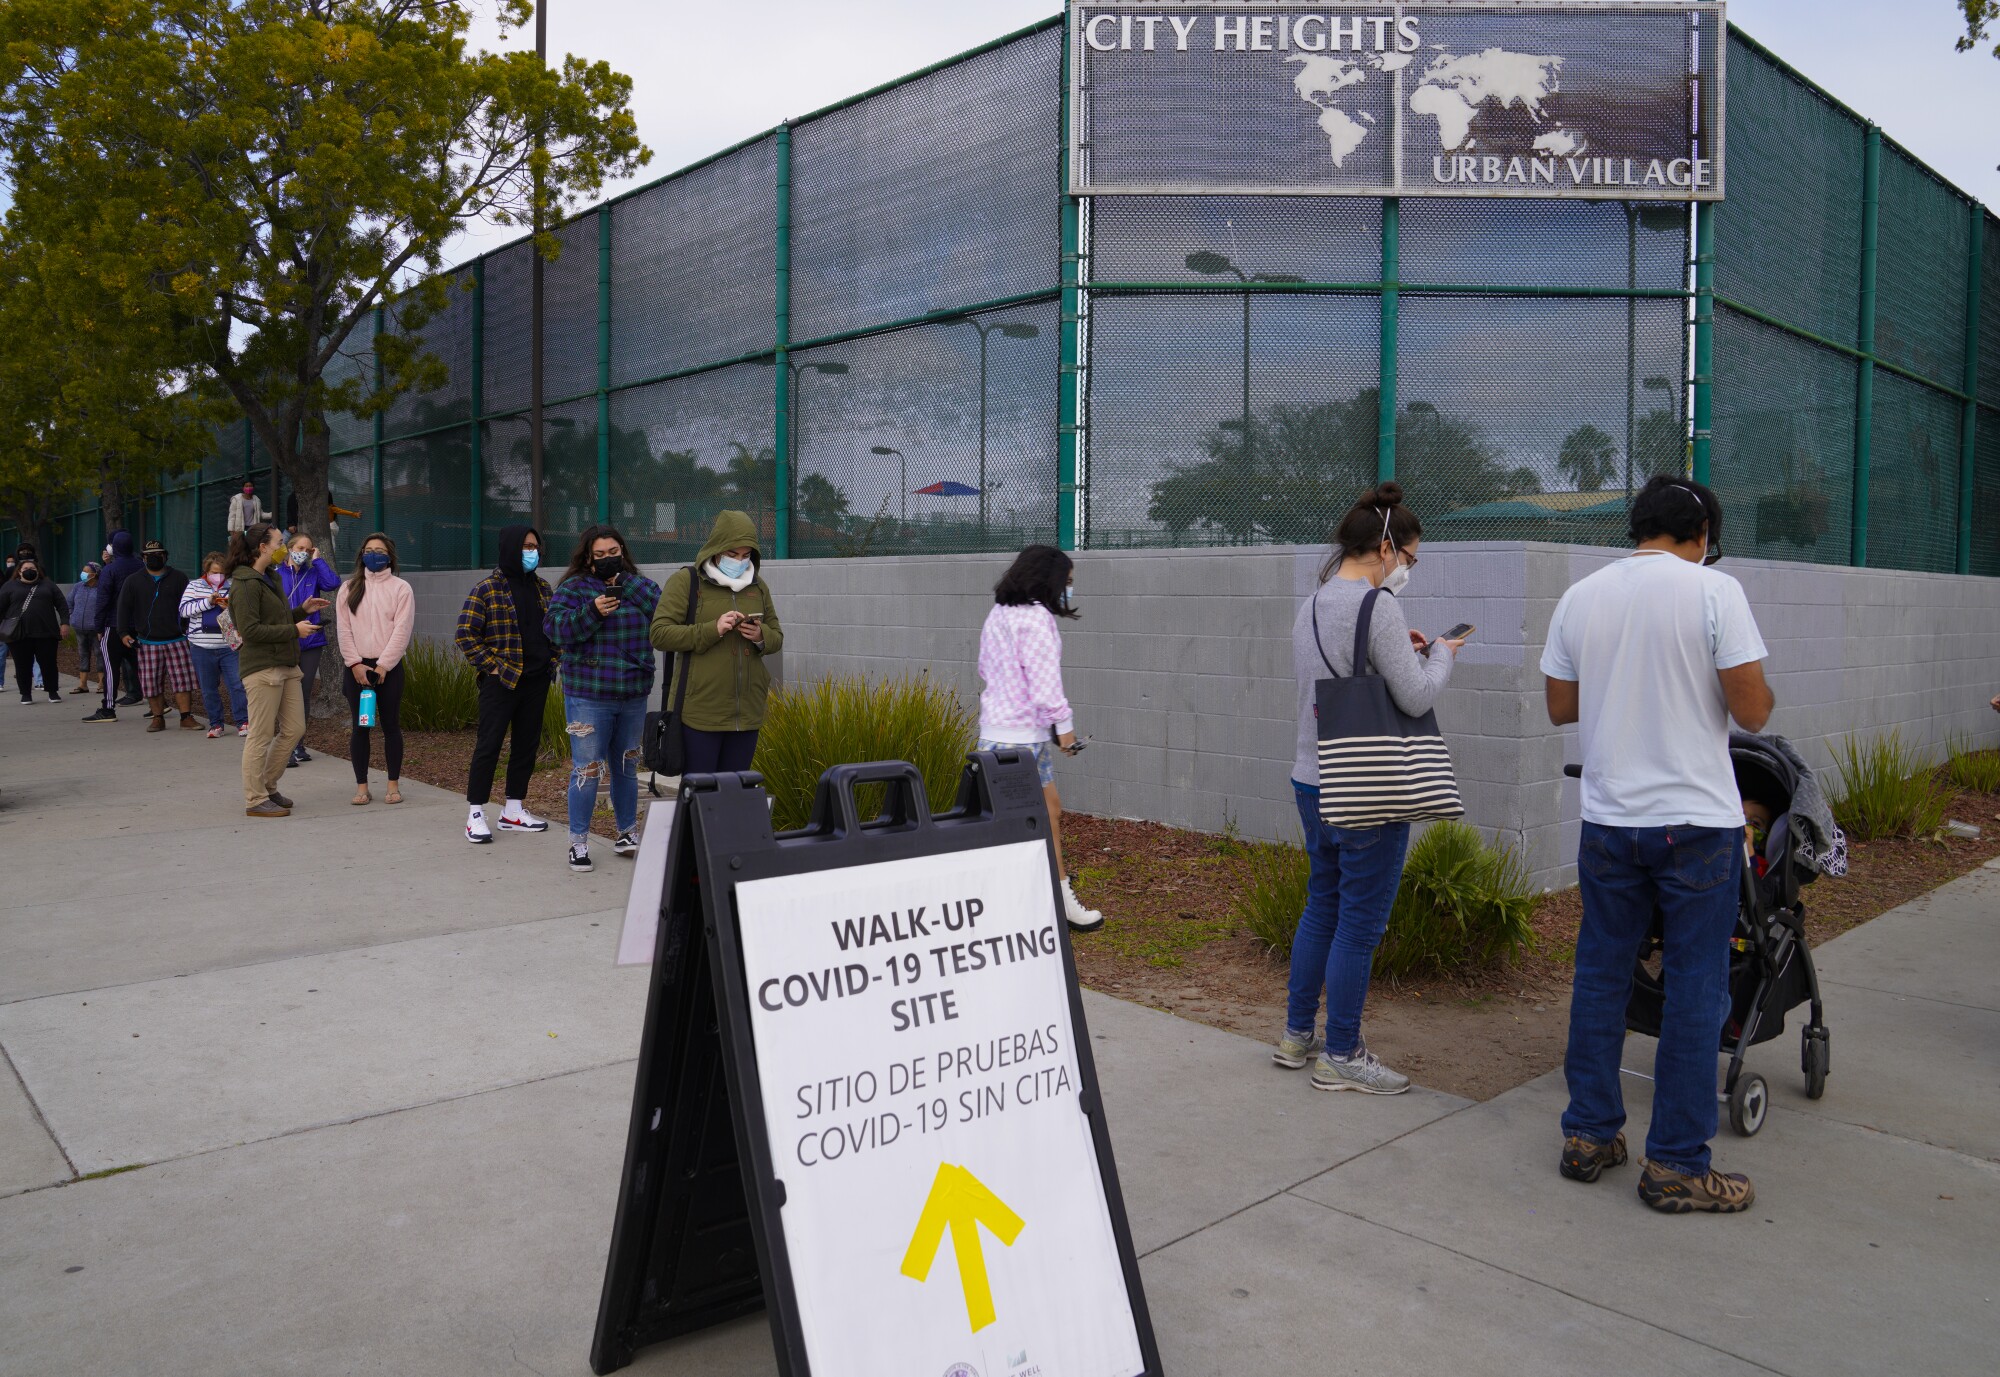 The line for the COVID test site in the City Heights Recreation Center.